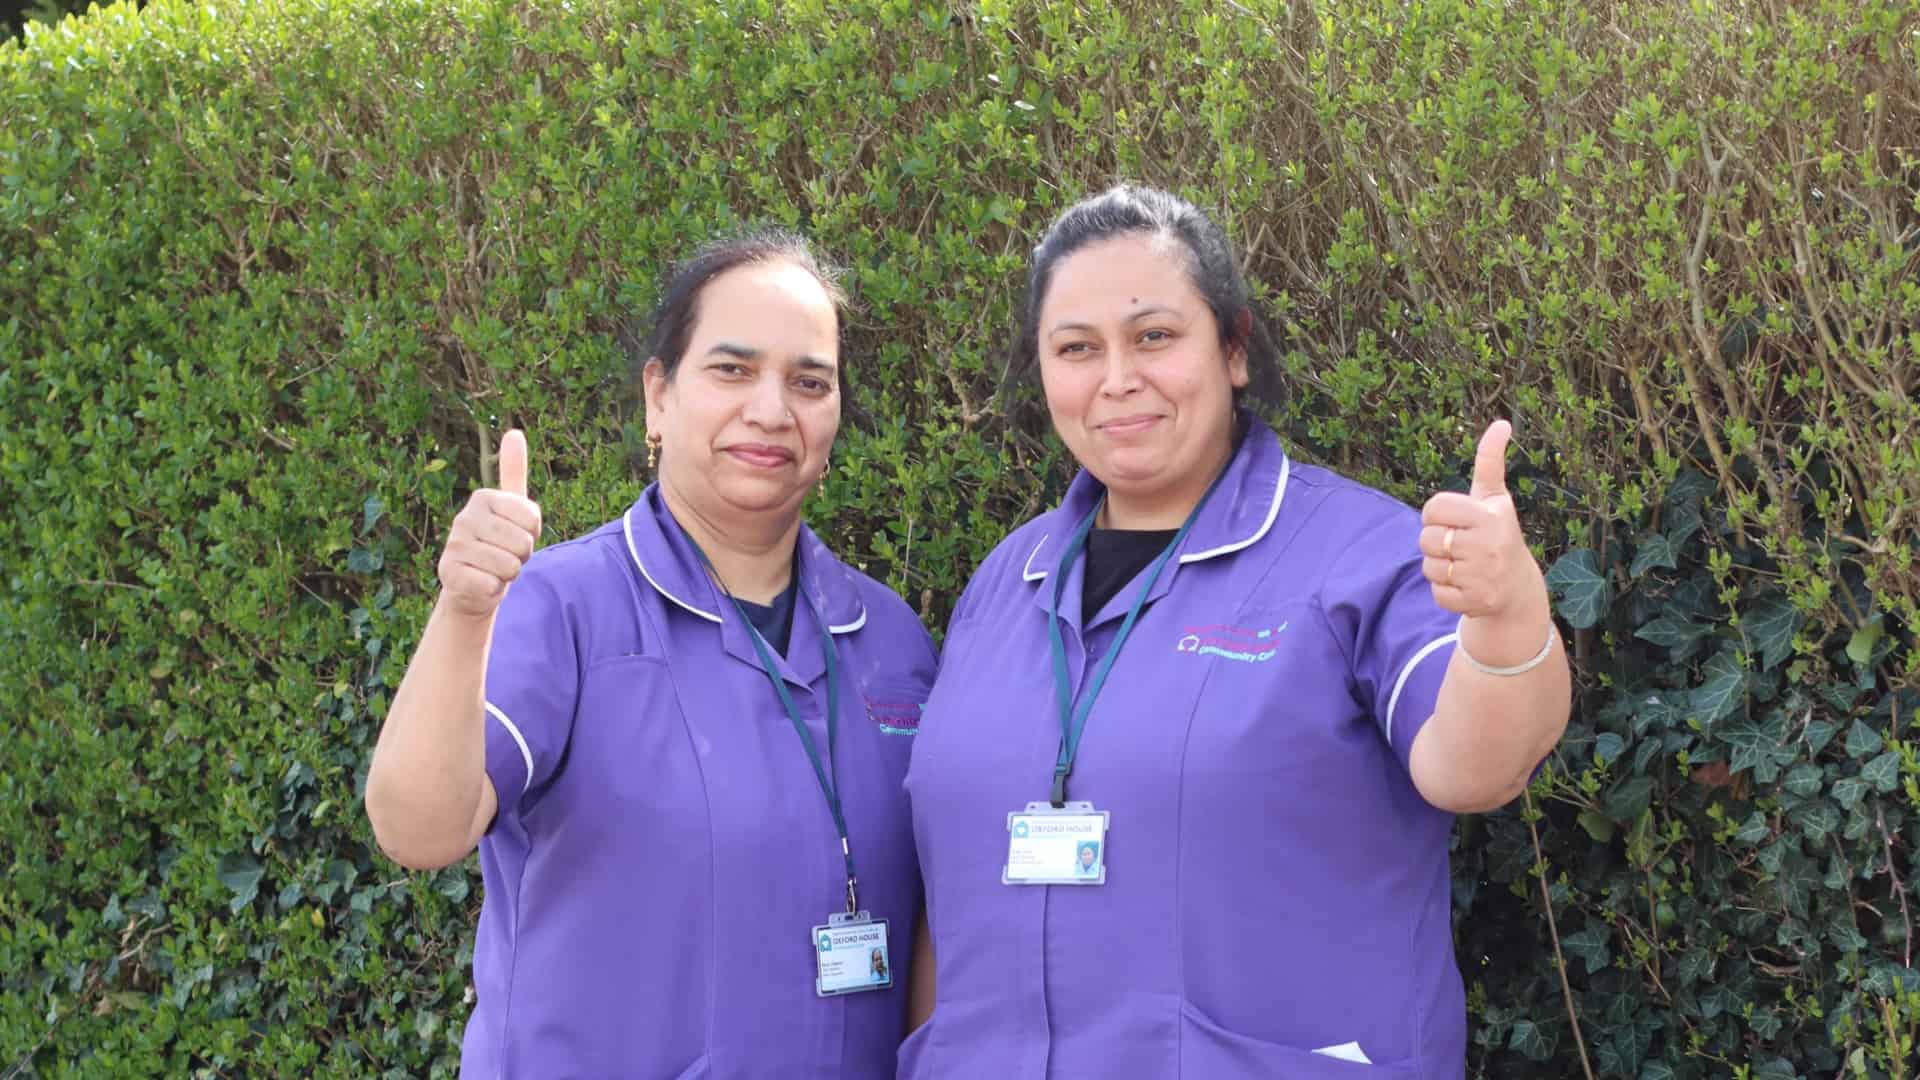 Two smiling female healthcare workers in purple uniforms stand in front of a hedge, giving a thumbs up to the camera. Both are wearing ID badges and provide home care services in Slough.